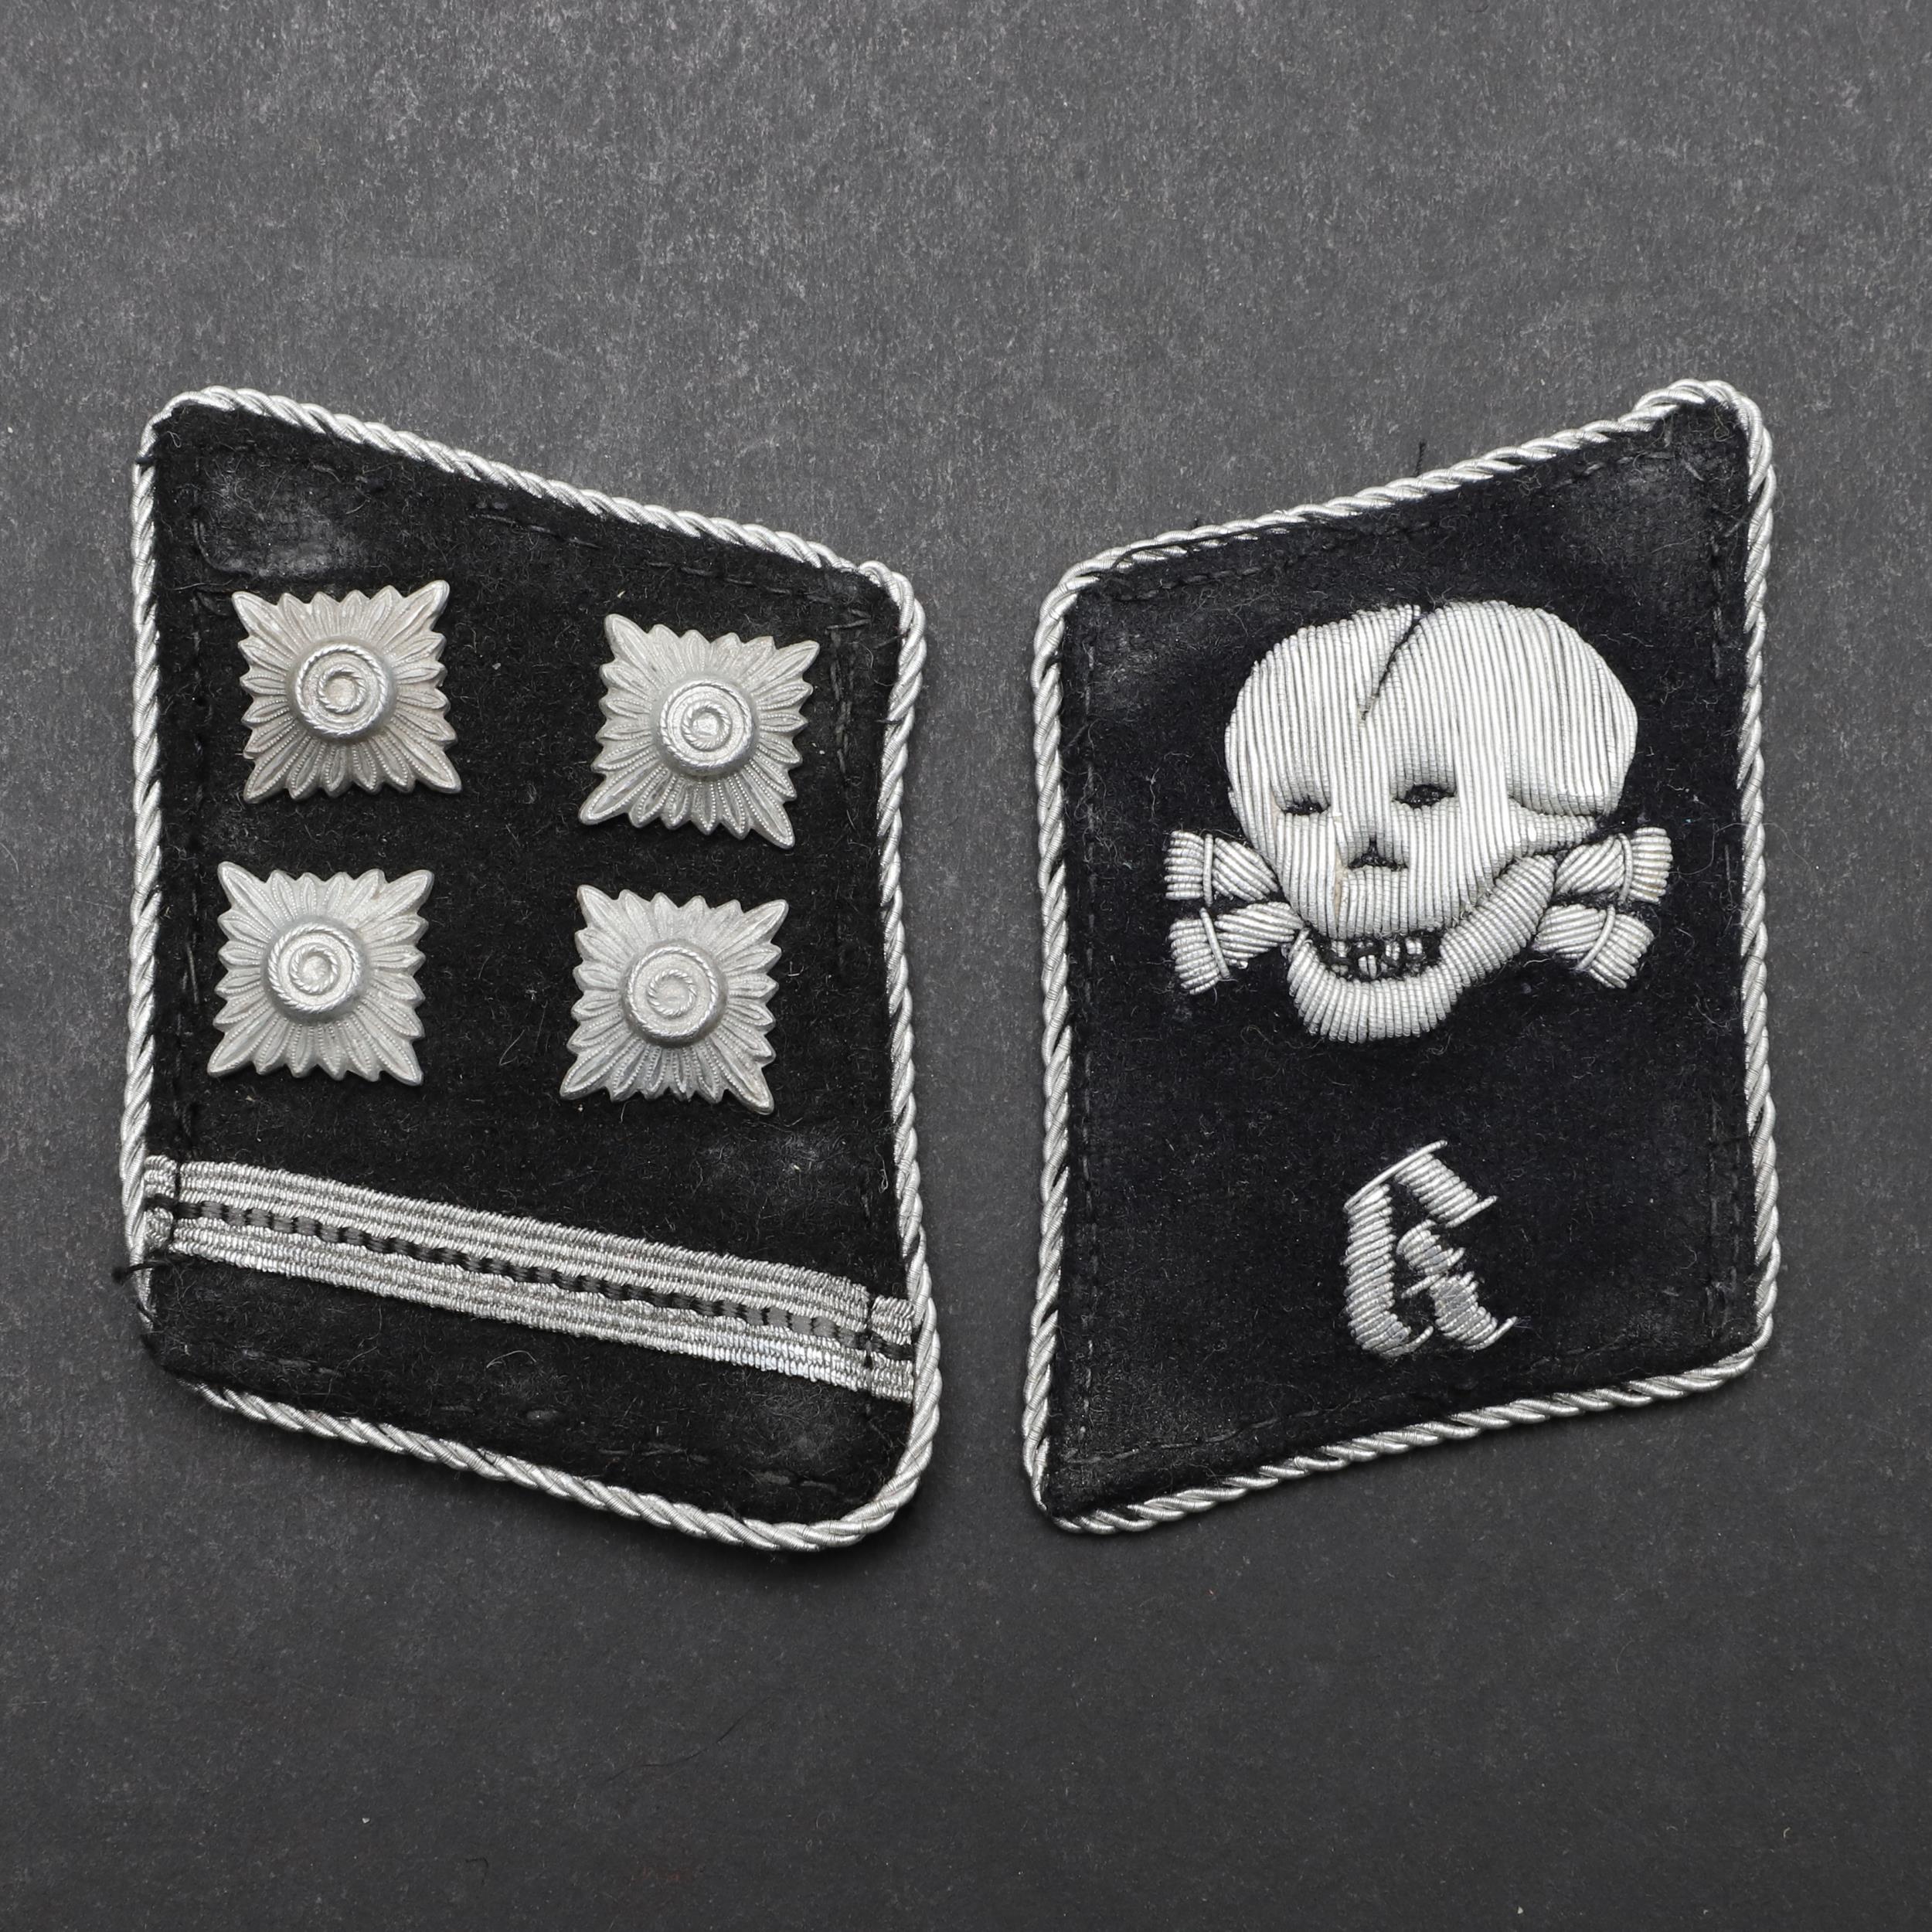 A PAIR OF SECOND WORLD WAR GERMAN SS OFFICER'S COLLAR PATCHES.